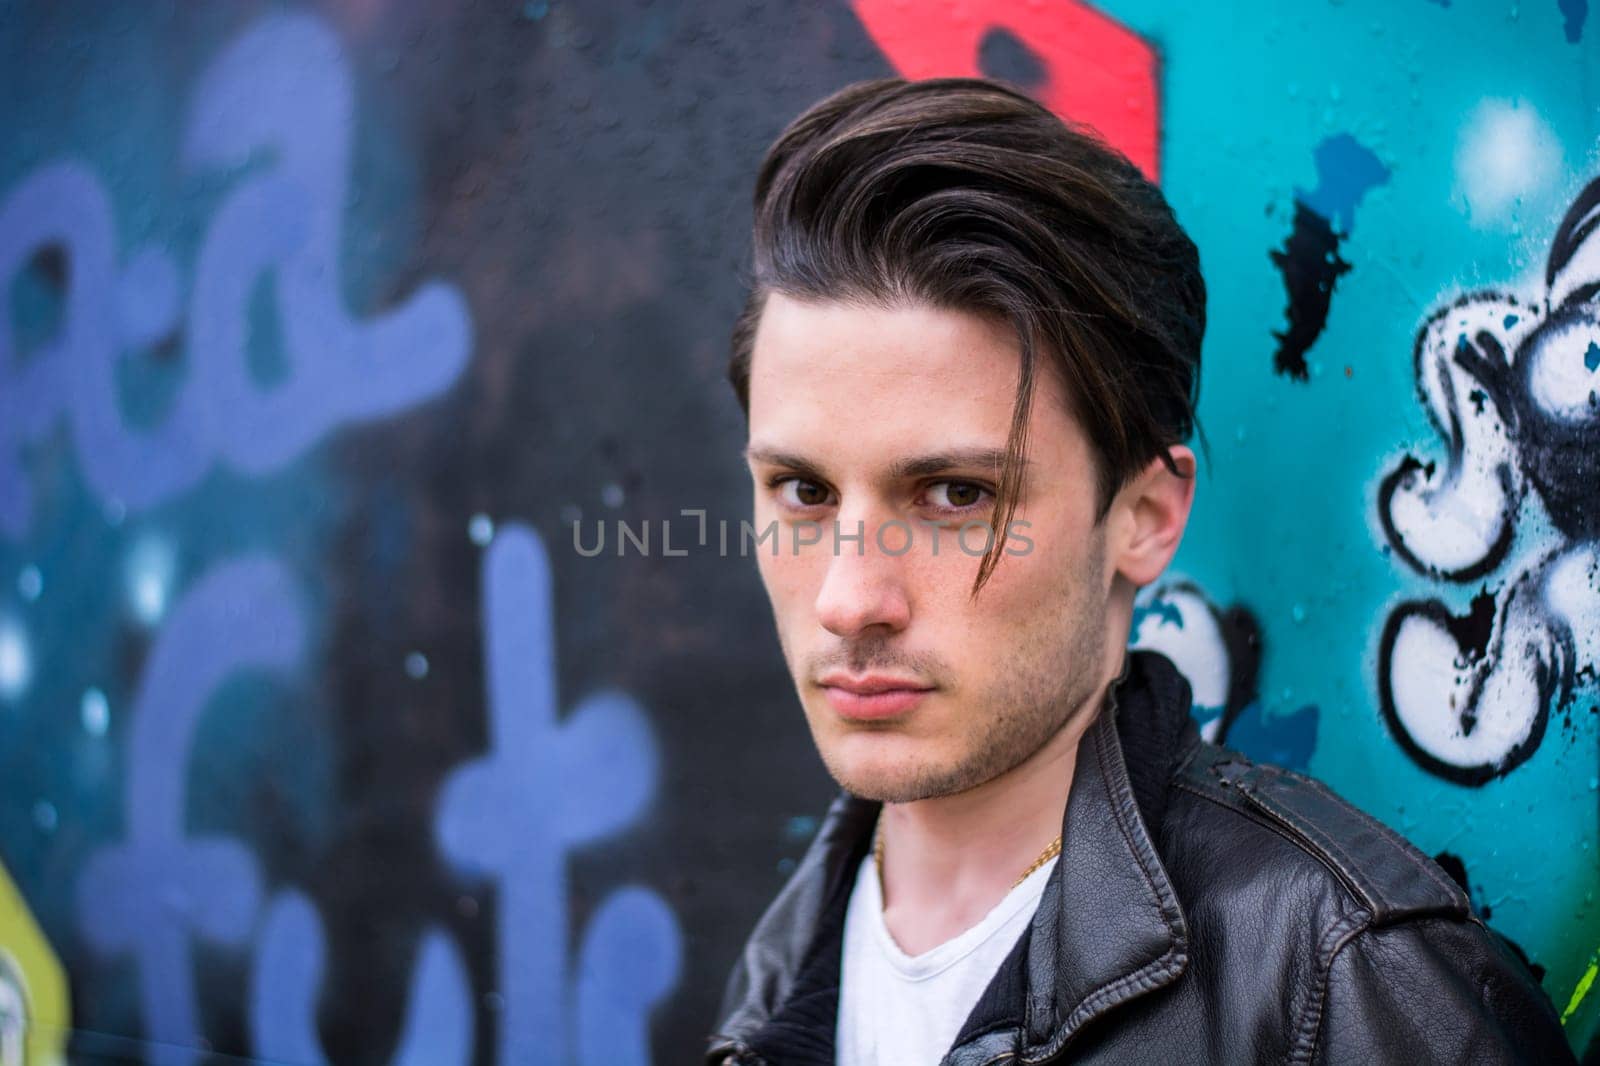 Photo of a man posing in front of a vibrant graffiti wall wearing a stylish leather jacket by artofphoto